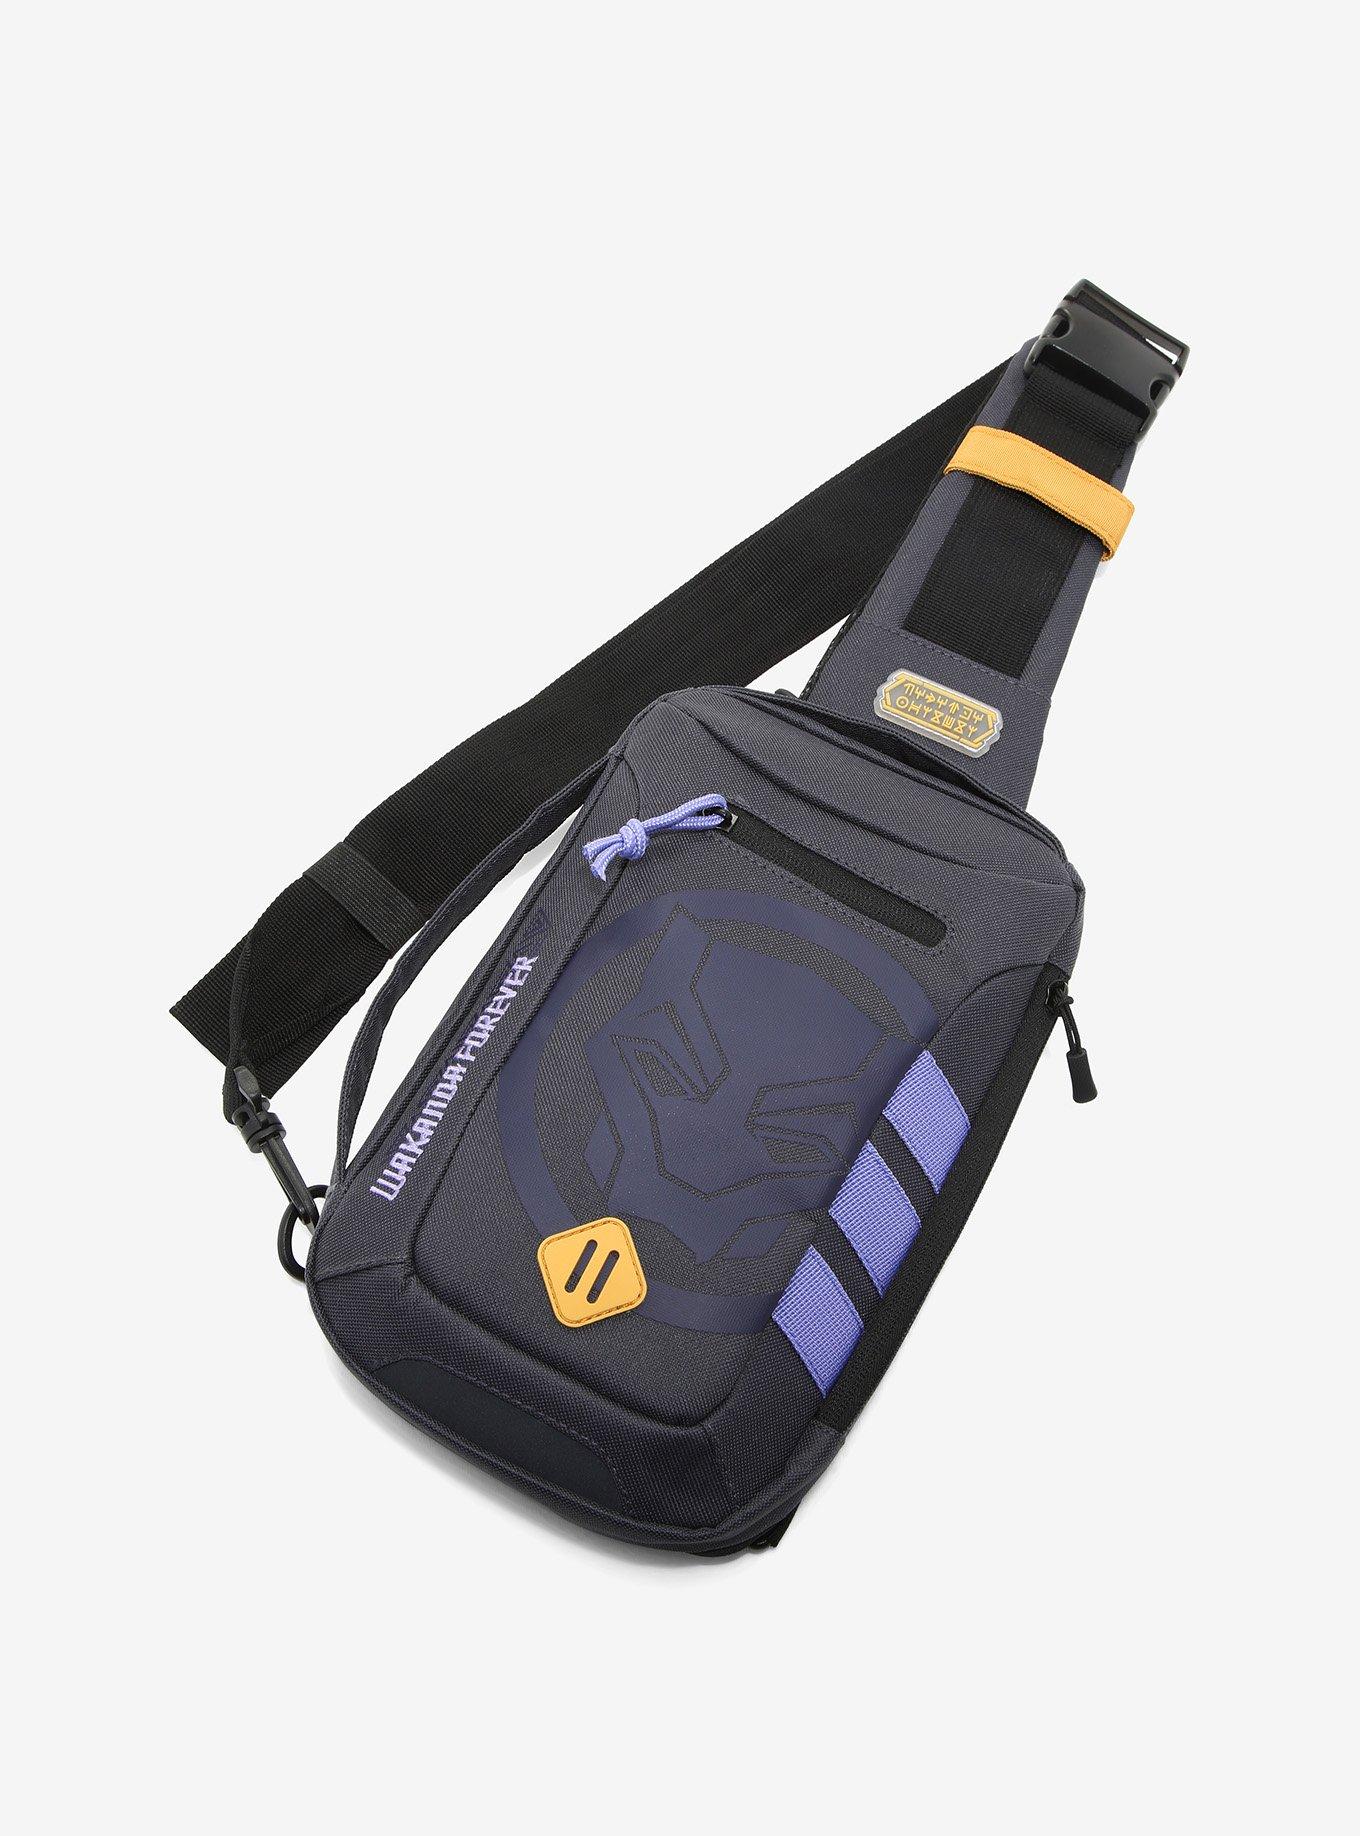 The new S Lock Sling Bag was selling out sooo fast, glad I was